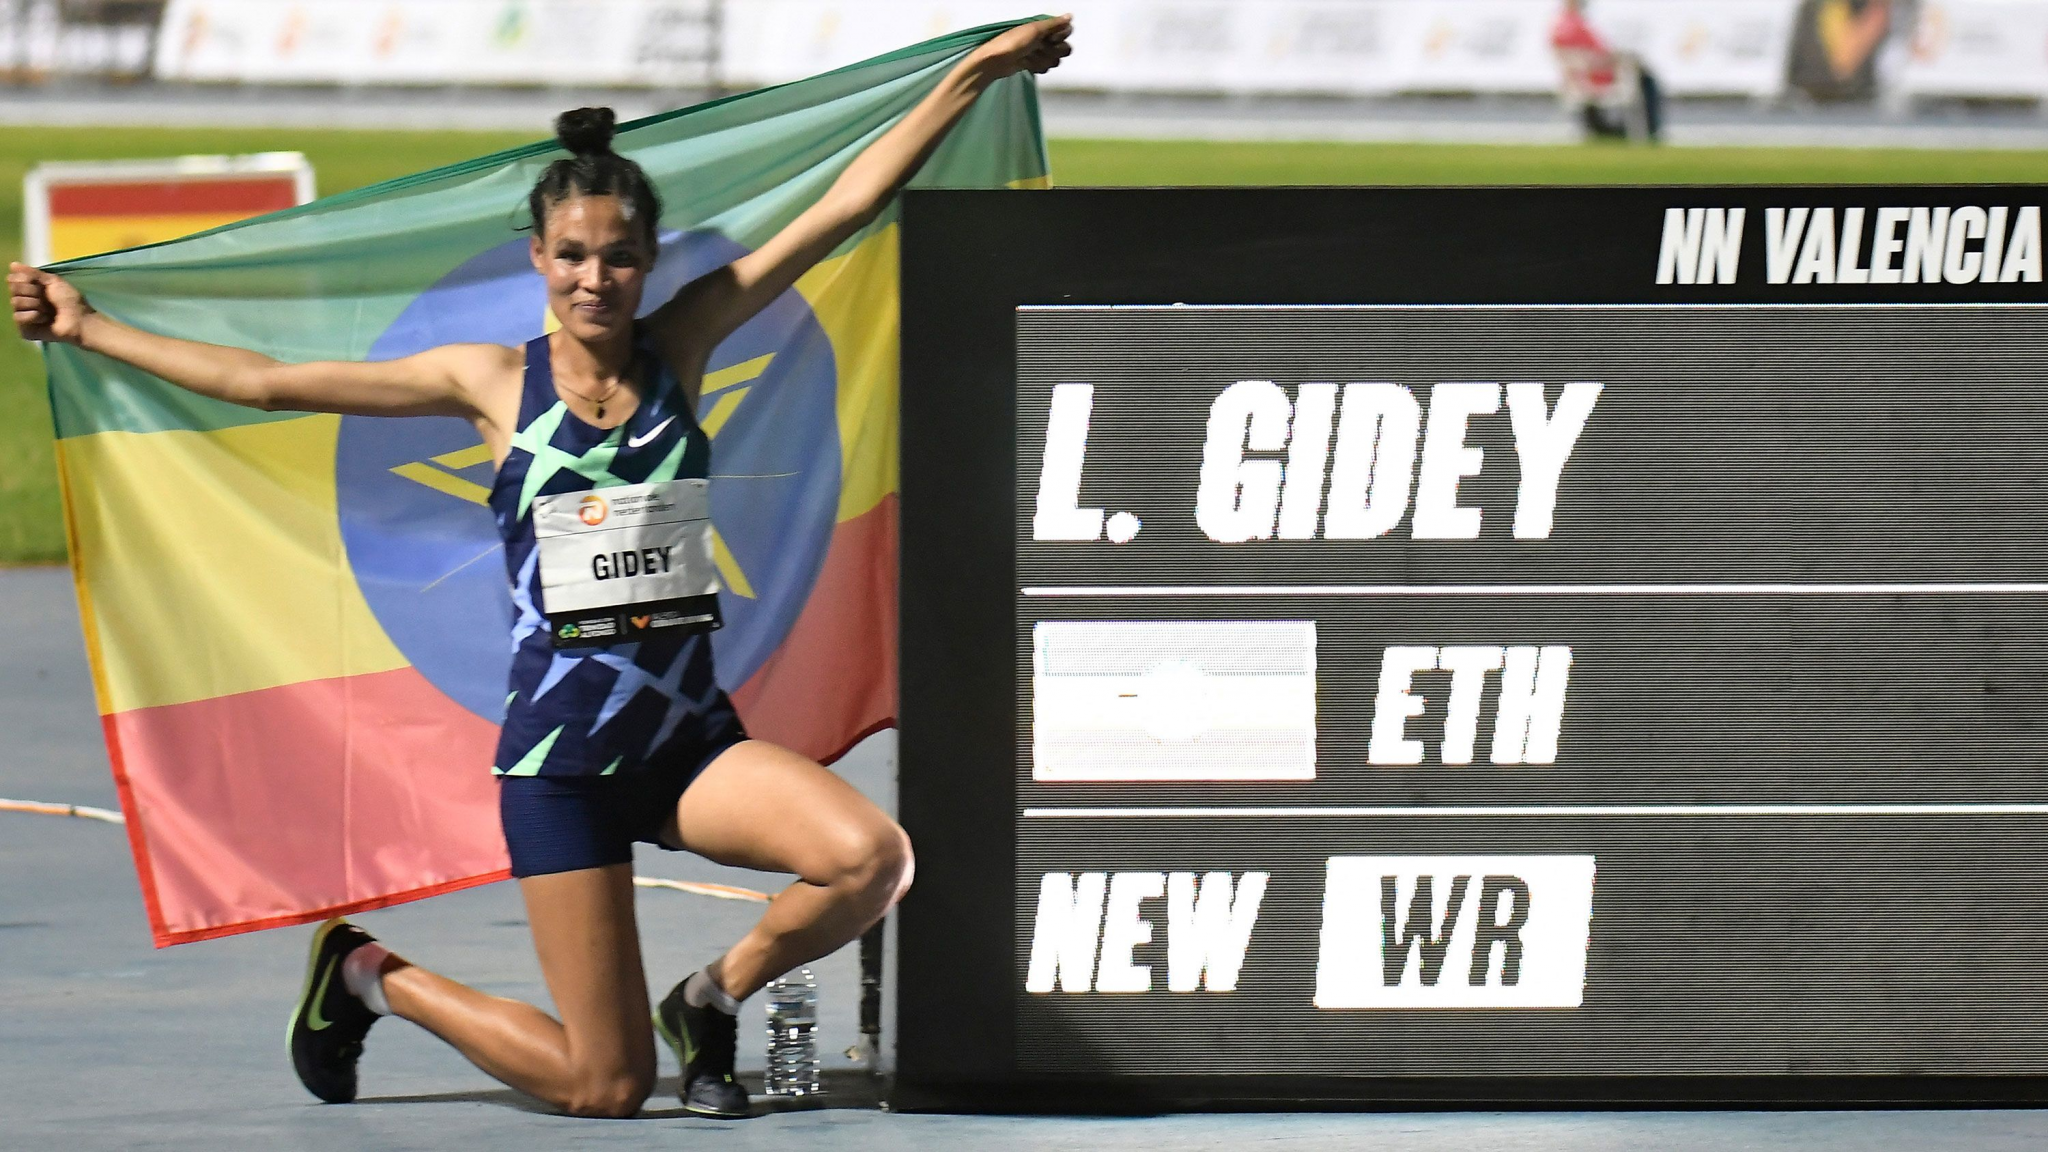 Ethiopia's Letesenbet Gidey utilised Wavelight technology when she broke the world record for 5,000m at Valenica in 2020 ©Getty Images